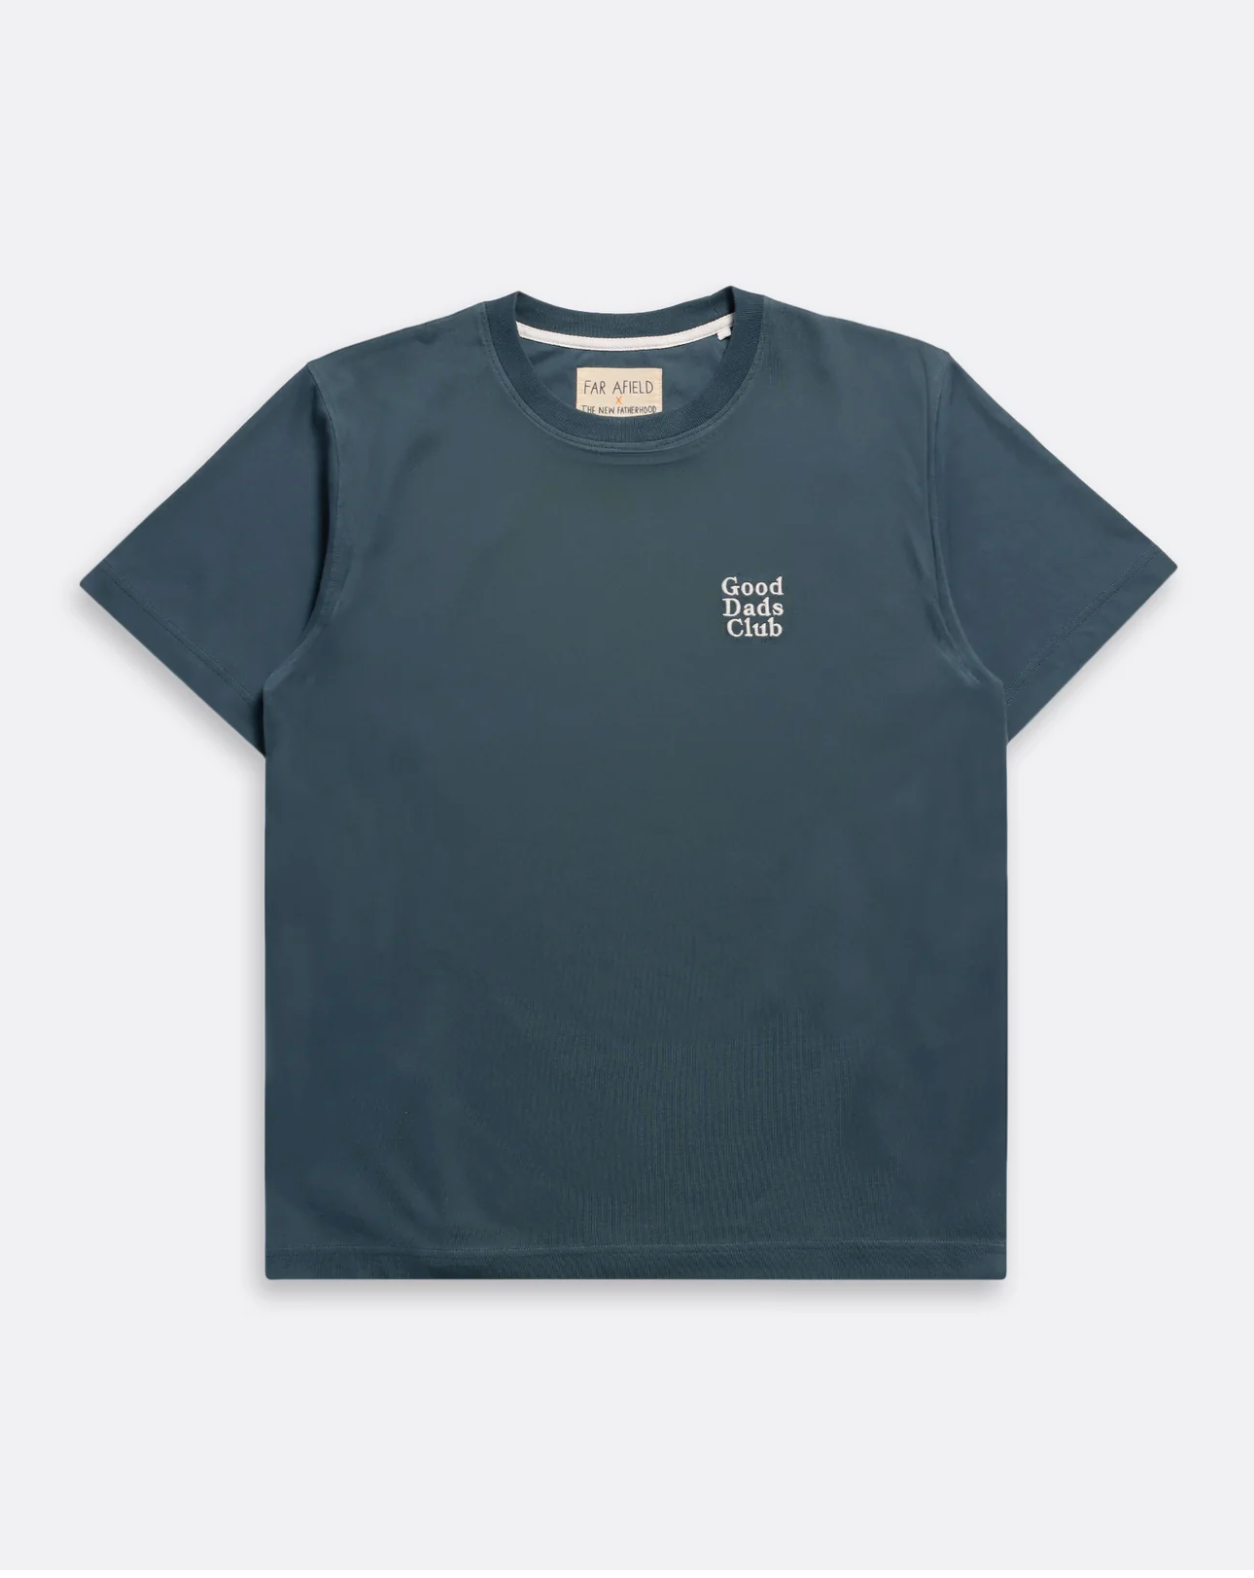 FAR AFIELD - Good Dads Club Embroidered  T-Shirt